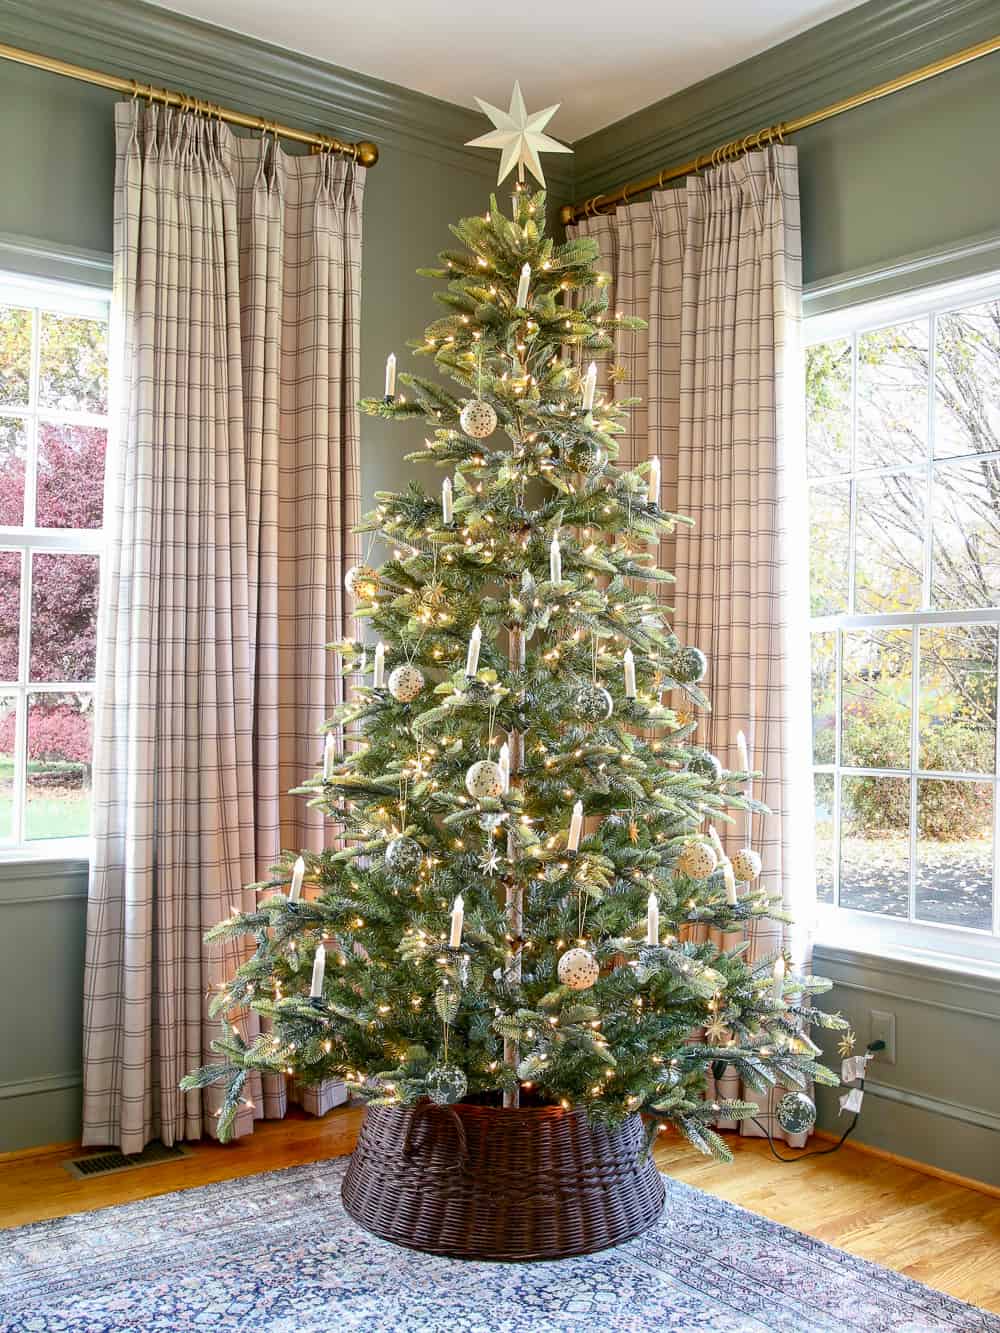 Artificial Christmas tree with vintage candles and ornaments in a dark woven tree collar, windowpane linen drapes on windows, Storm cloud gray walls, brass curtain rod, crown molding